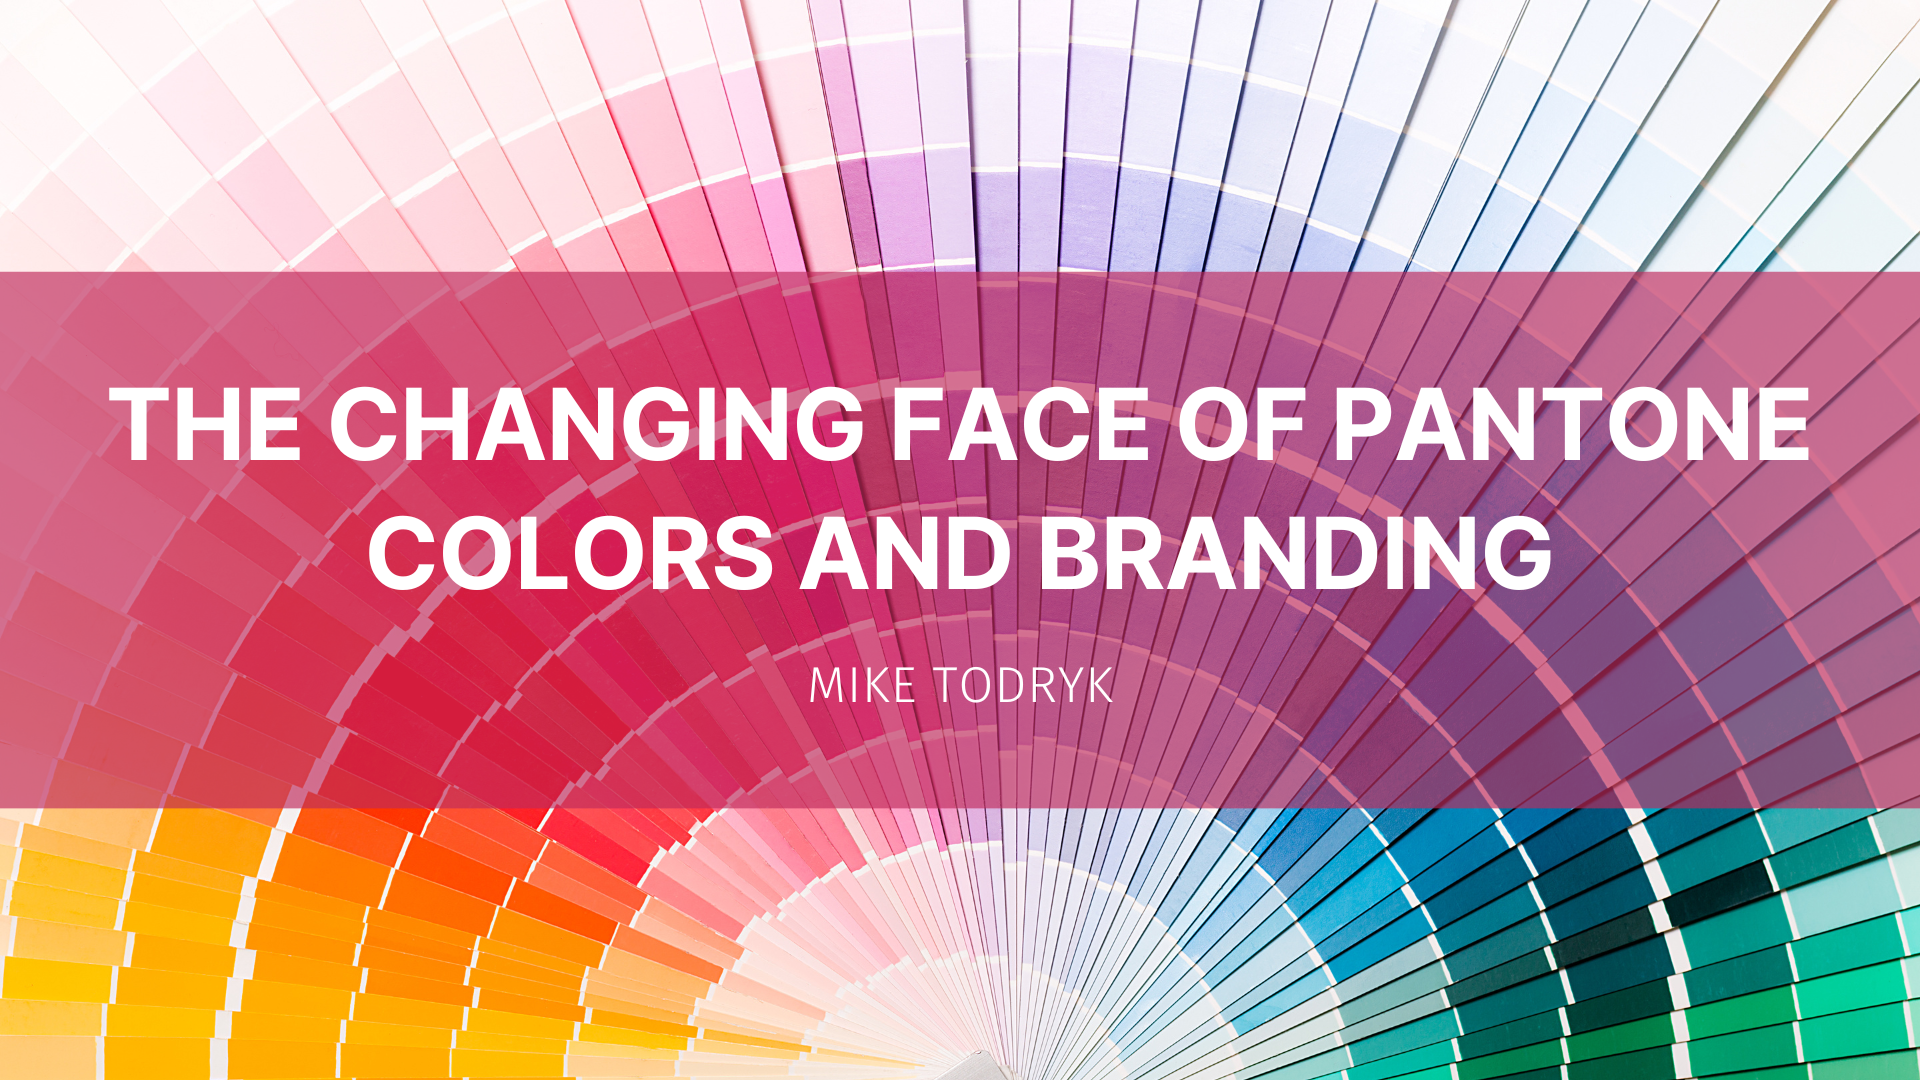 Featured image for “The Changing Face of Pantone Colors and Branding”